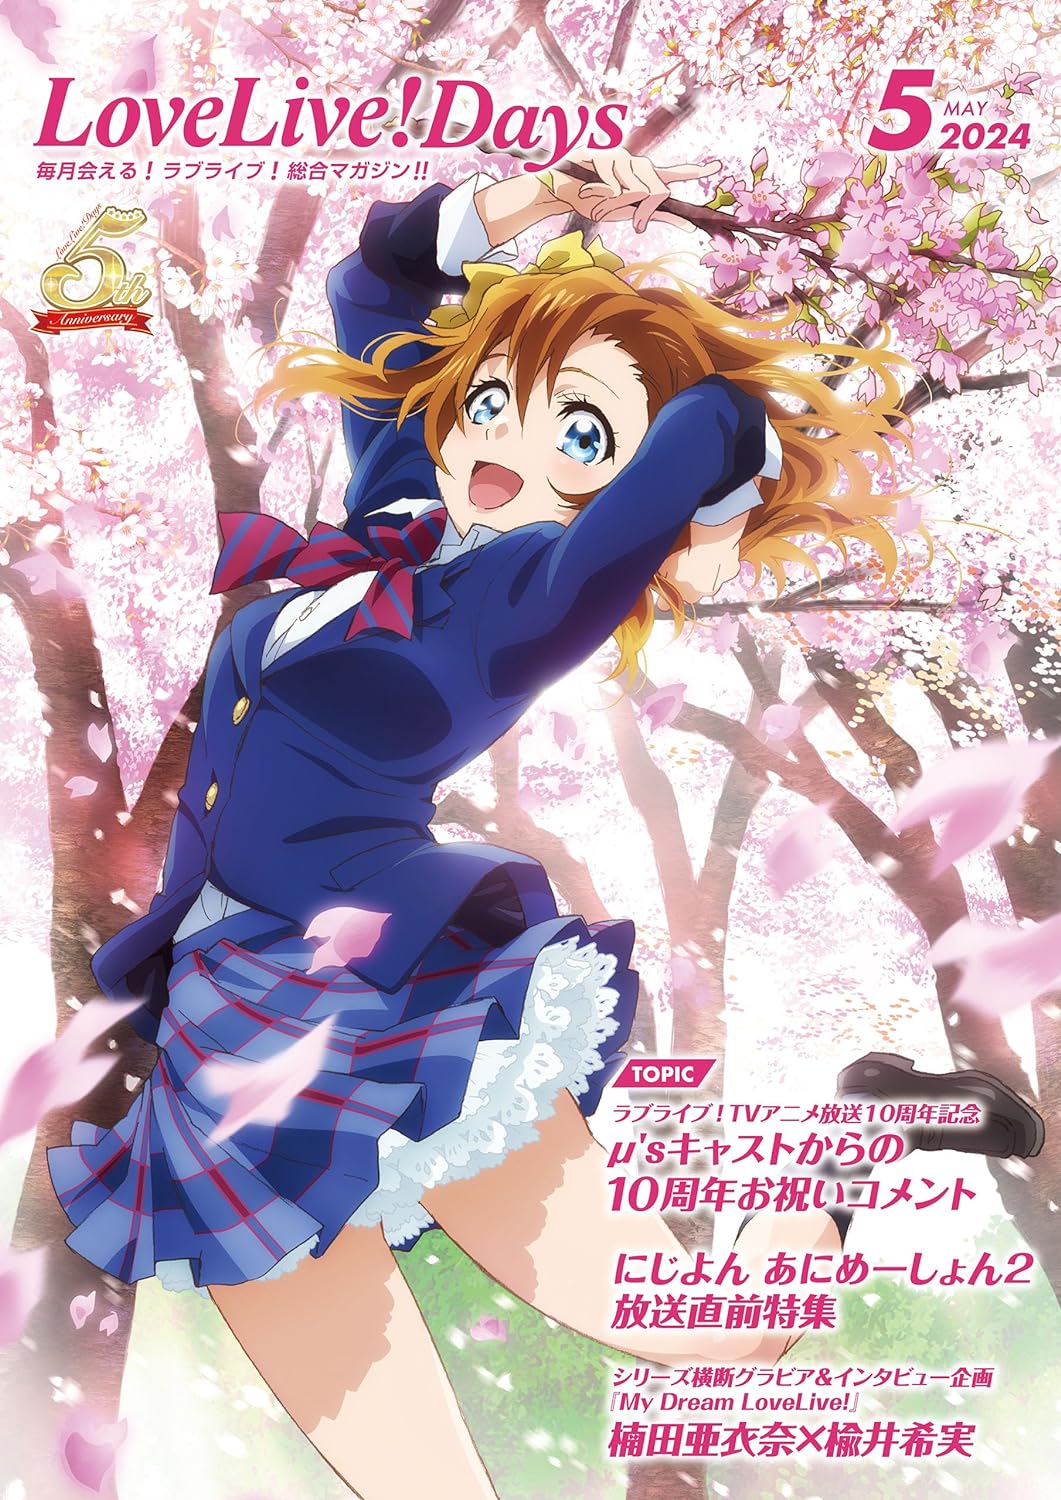 LoveLive!Days May 2024